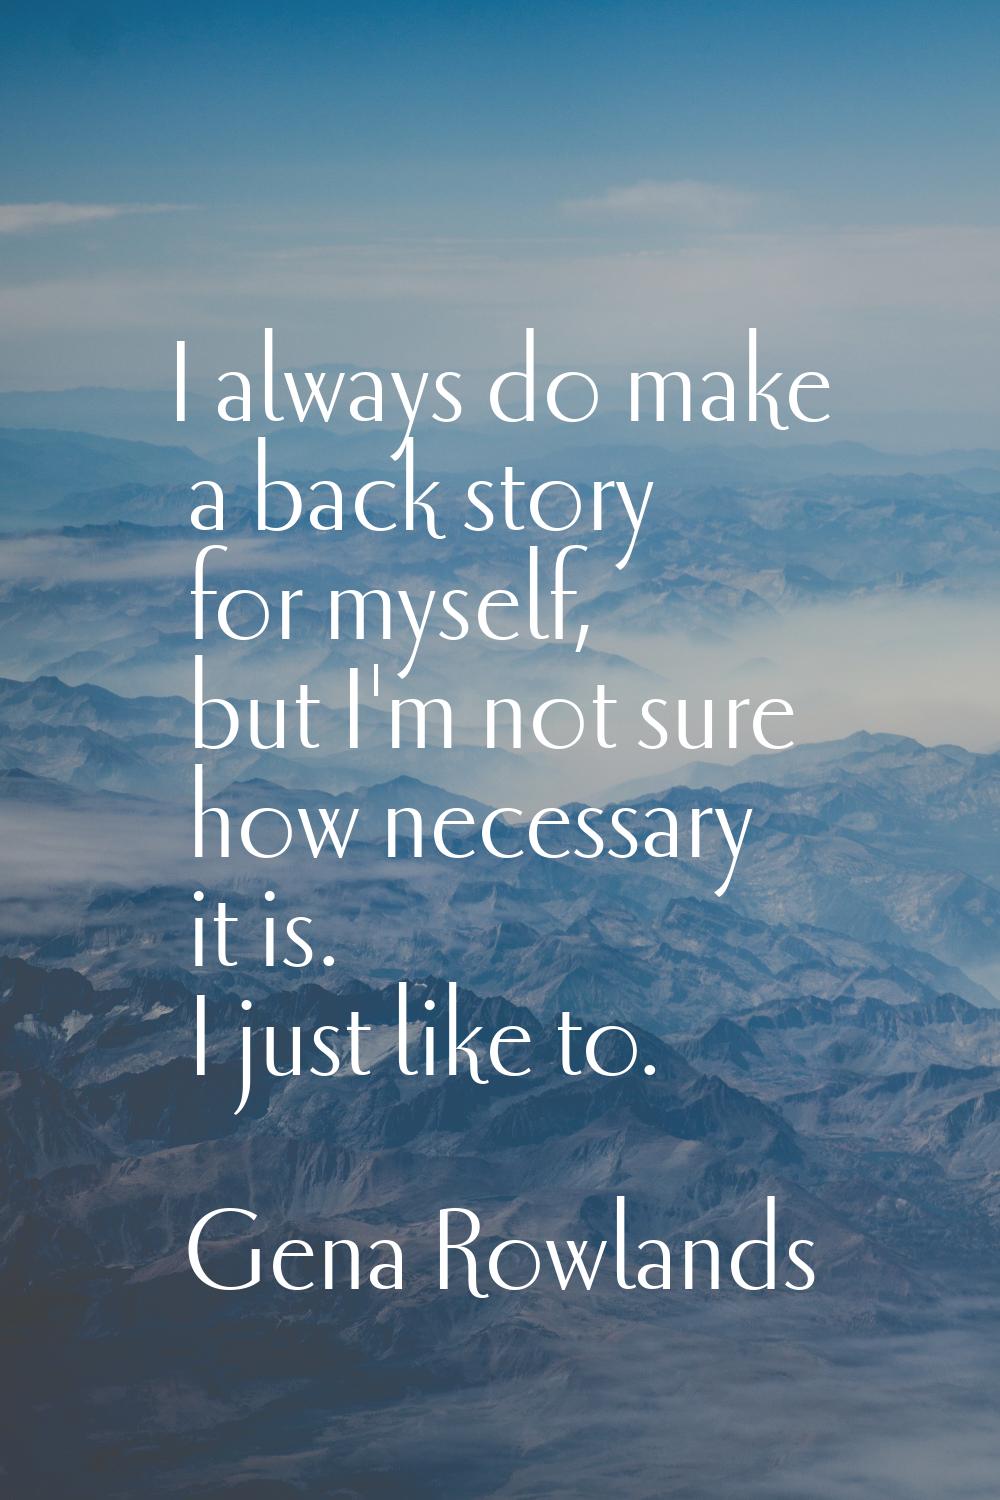 I always do make a back story for myself, but I'm not sure how necessary it is. I just like to.